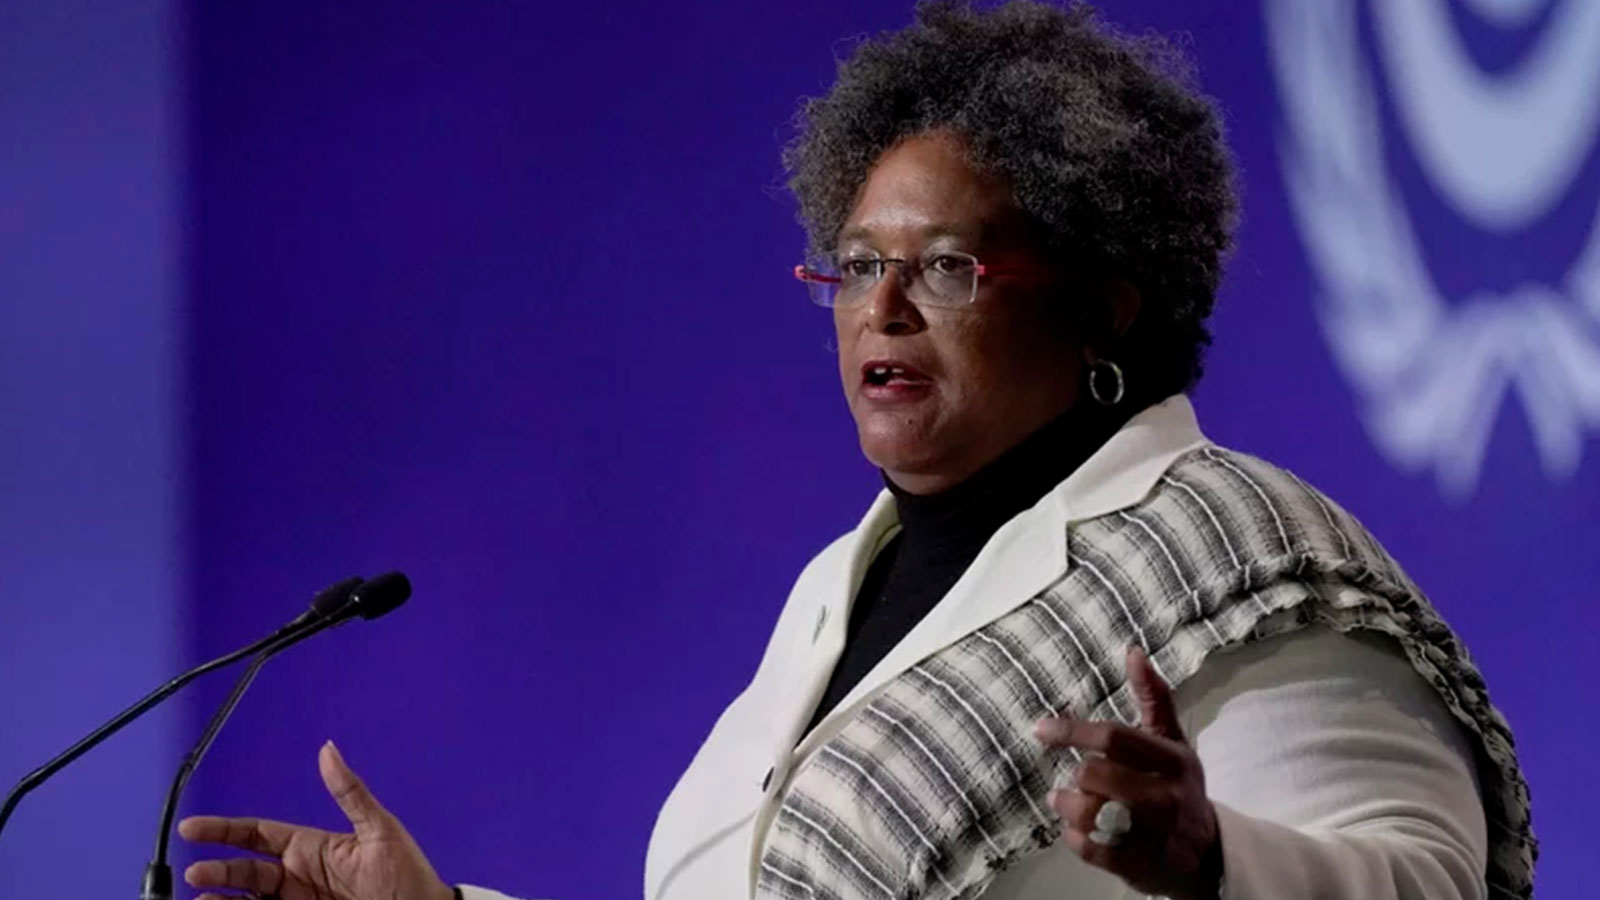 Barbados Prime Minister Mia Amor Mottley, who became the nation's first female leader in 2018 and its first leader under its republican system 